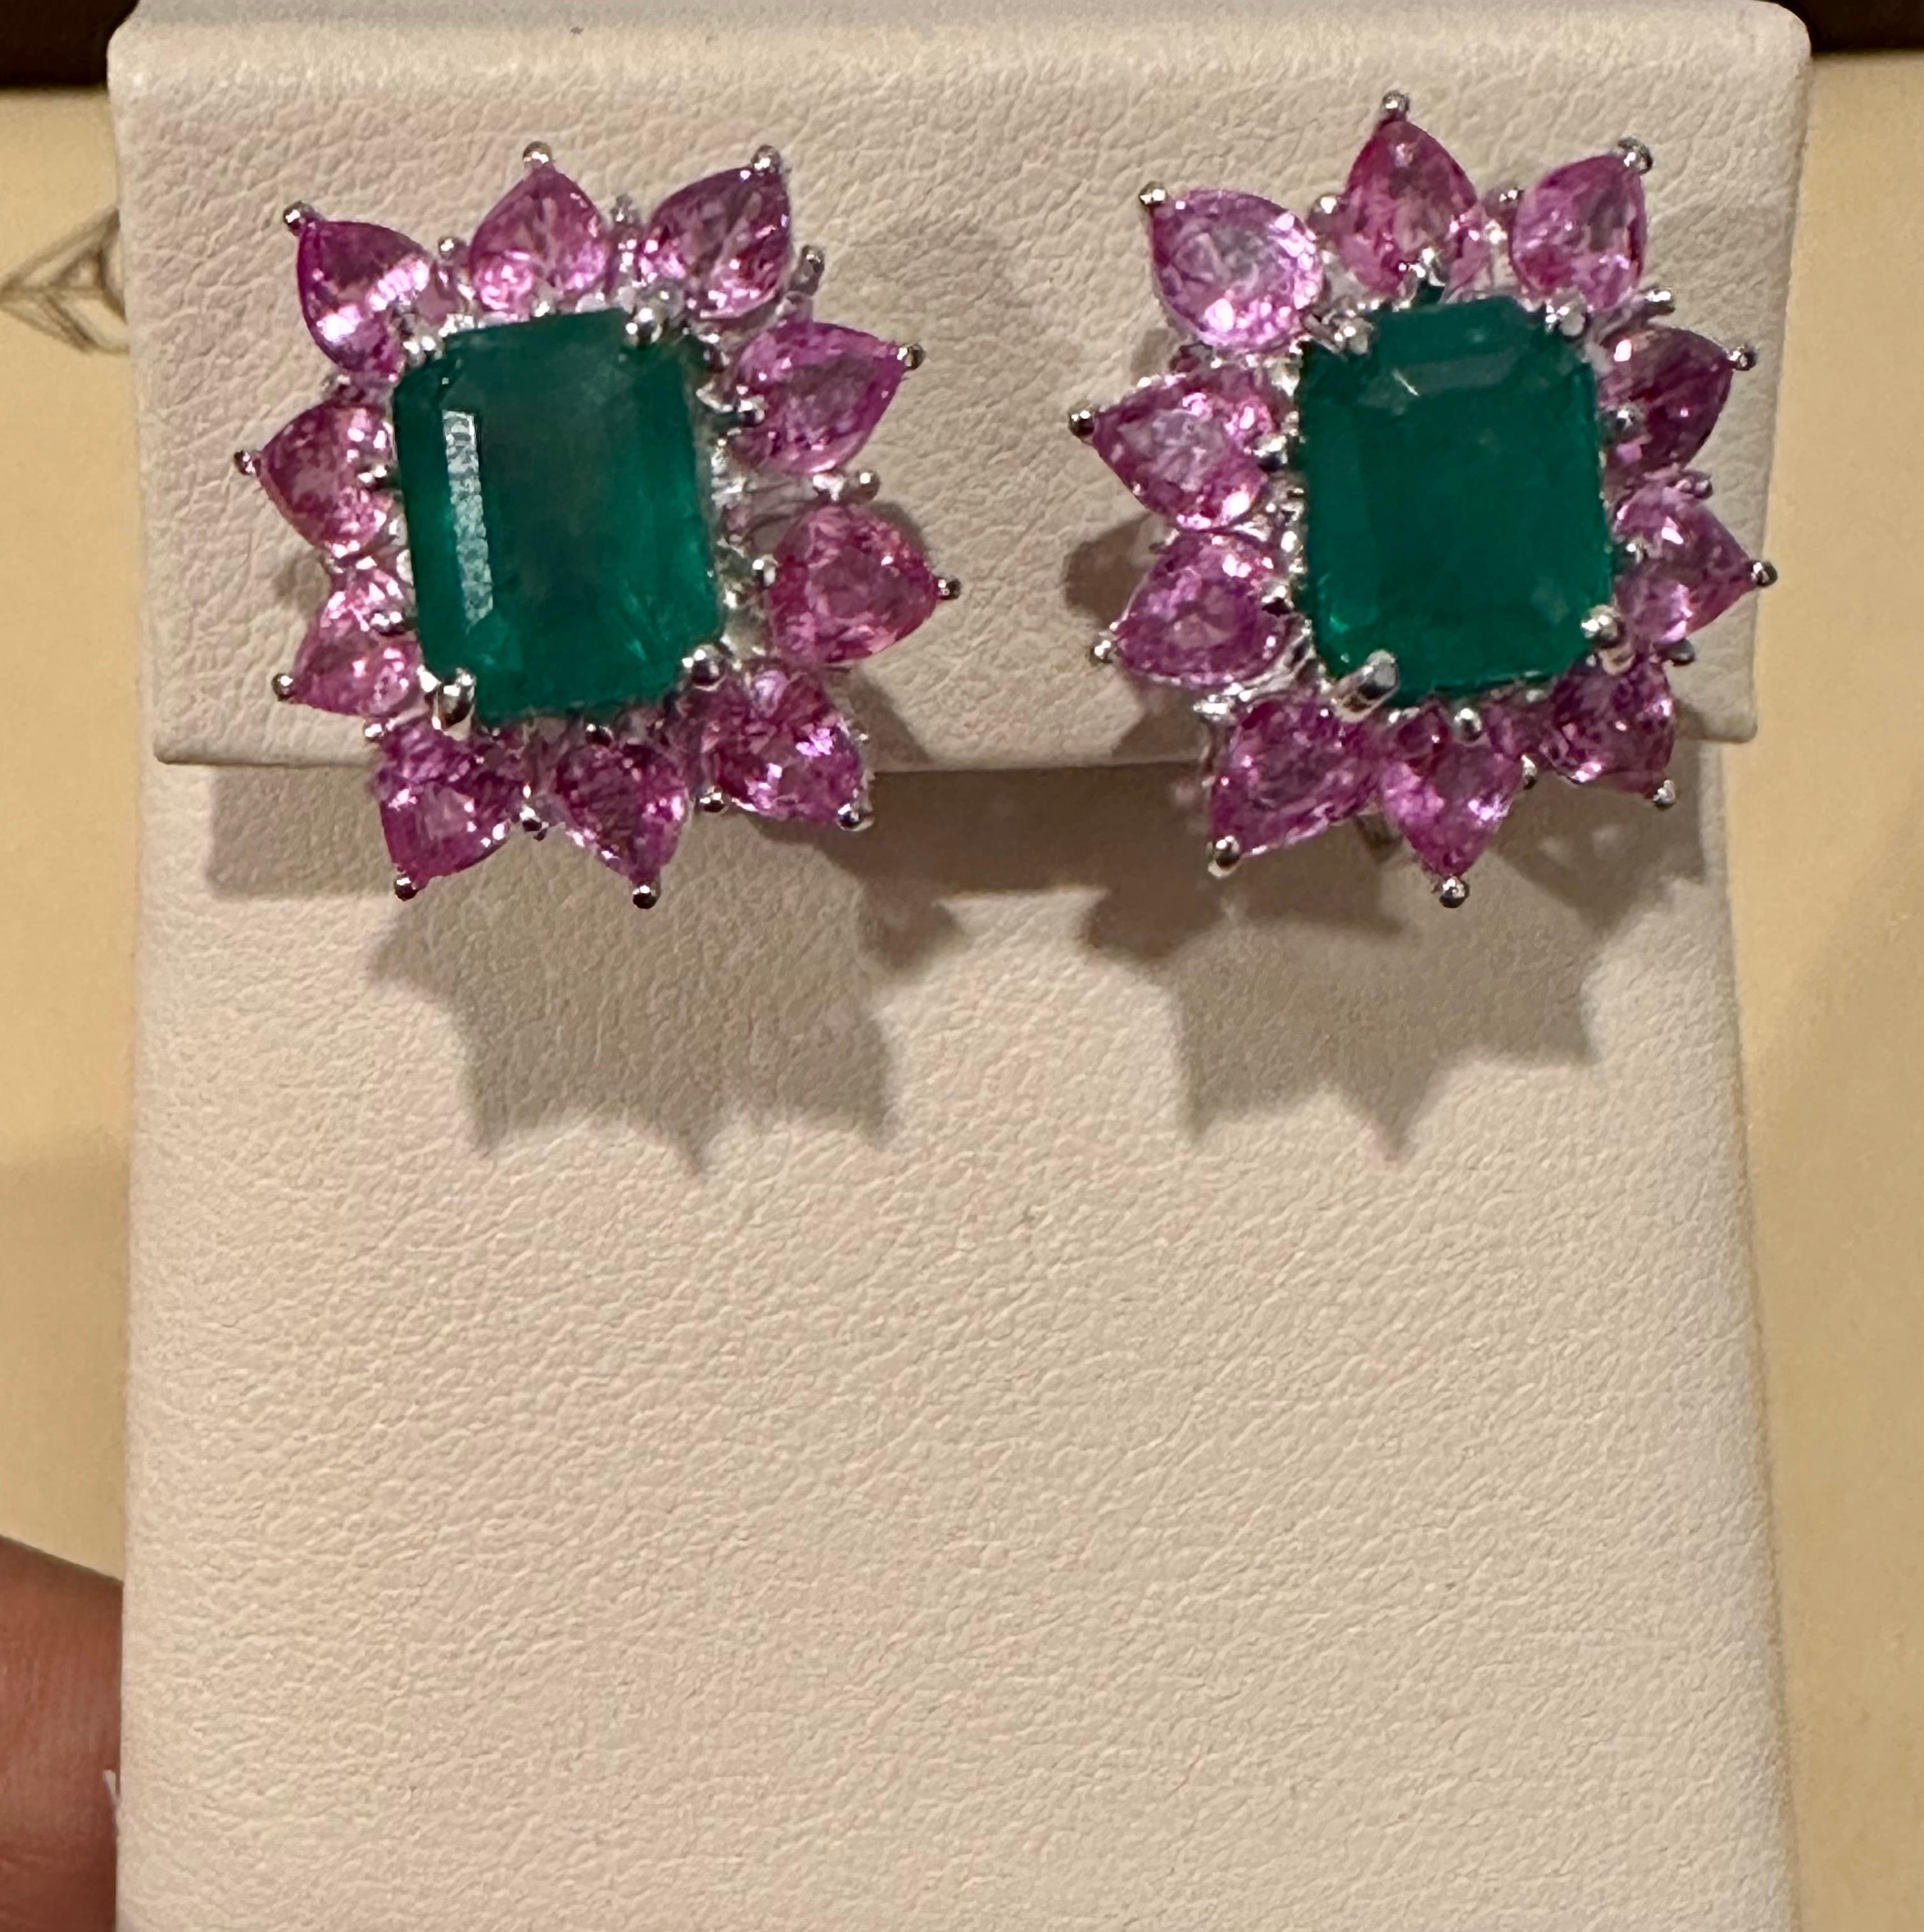 Vintage 5 Ct Natural Emerald Cut Emerald & Pink Sapphire Earrings Platinum
Approximately 5 Ct  Emerald Cut  Emerald  & Diamond Earrings surrounded by oval shape pink sapphire , made in platinum

This exquisite pair of earrings are beautifully